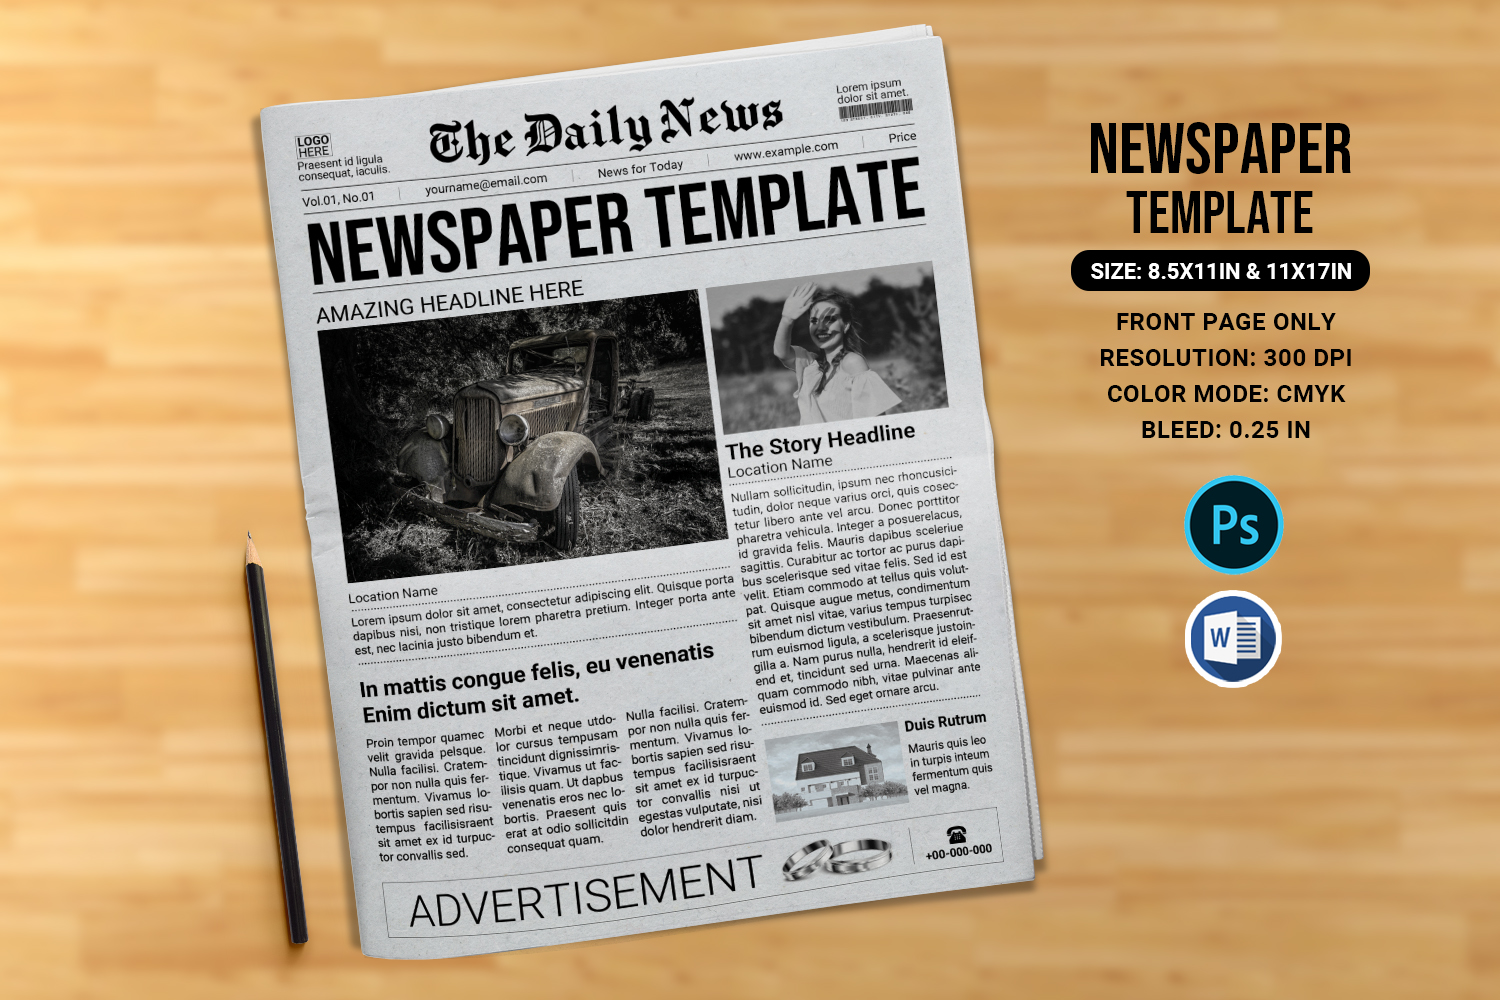 One Page Newspaper Template, Ms Word and Photoshop